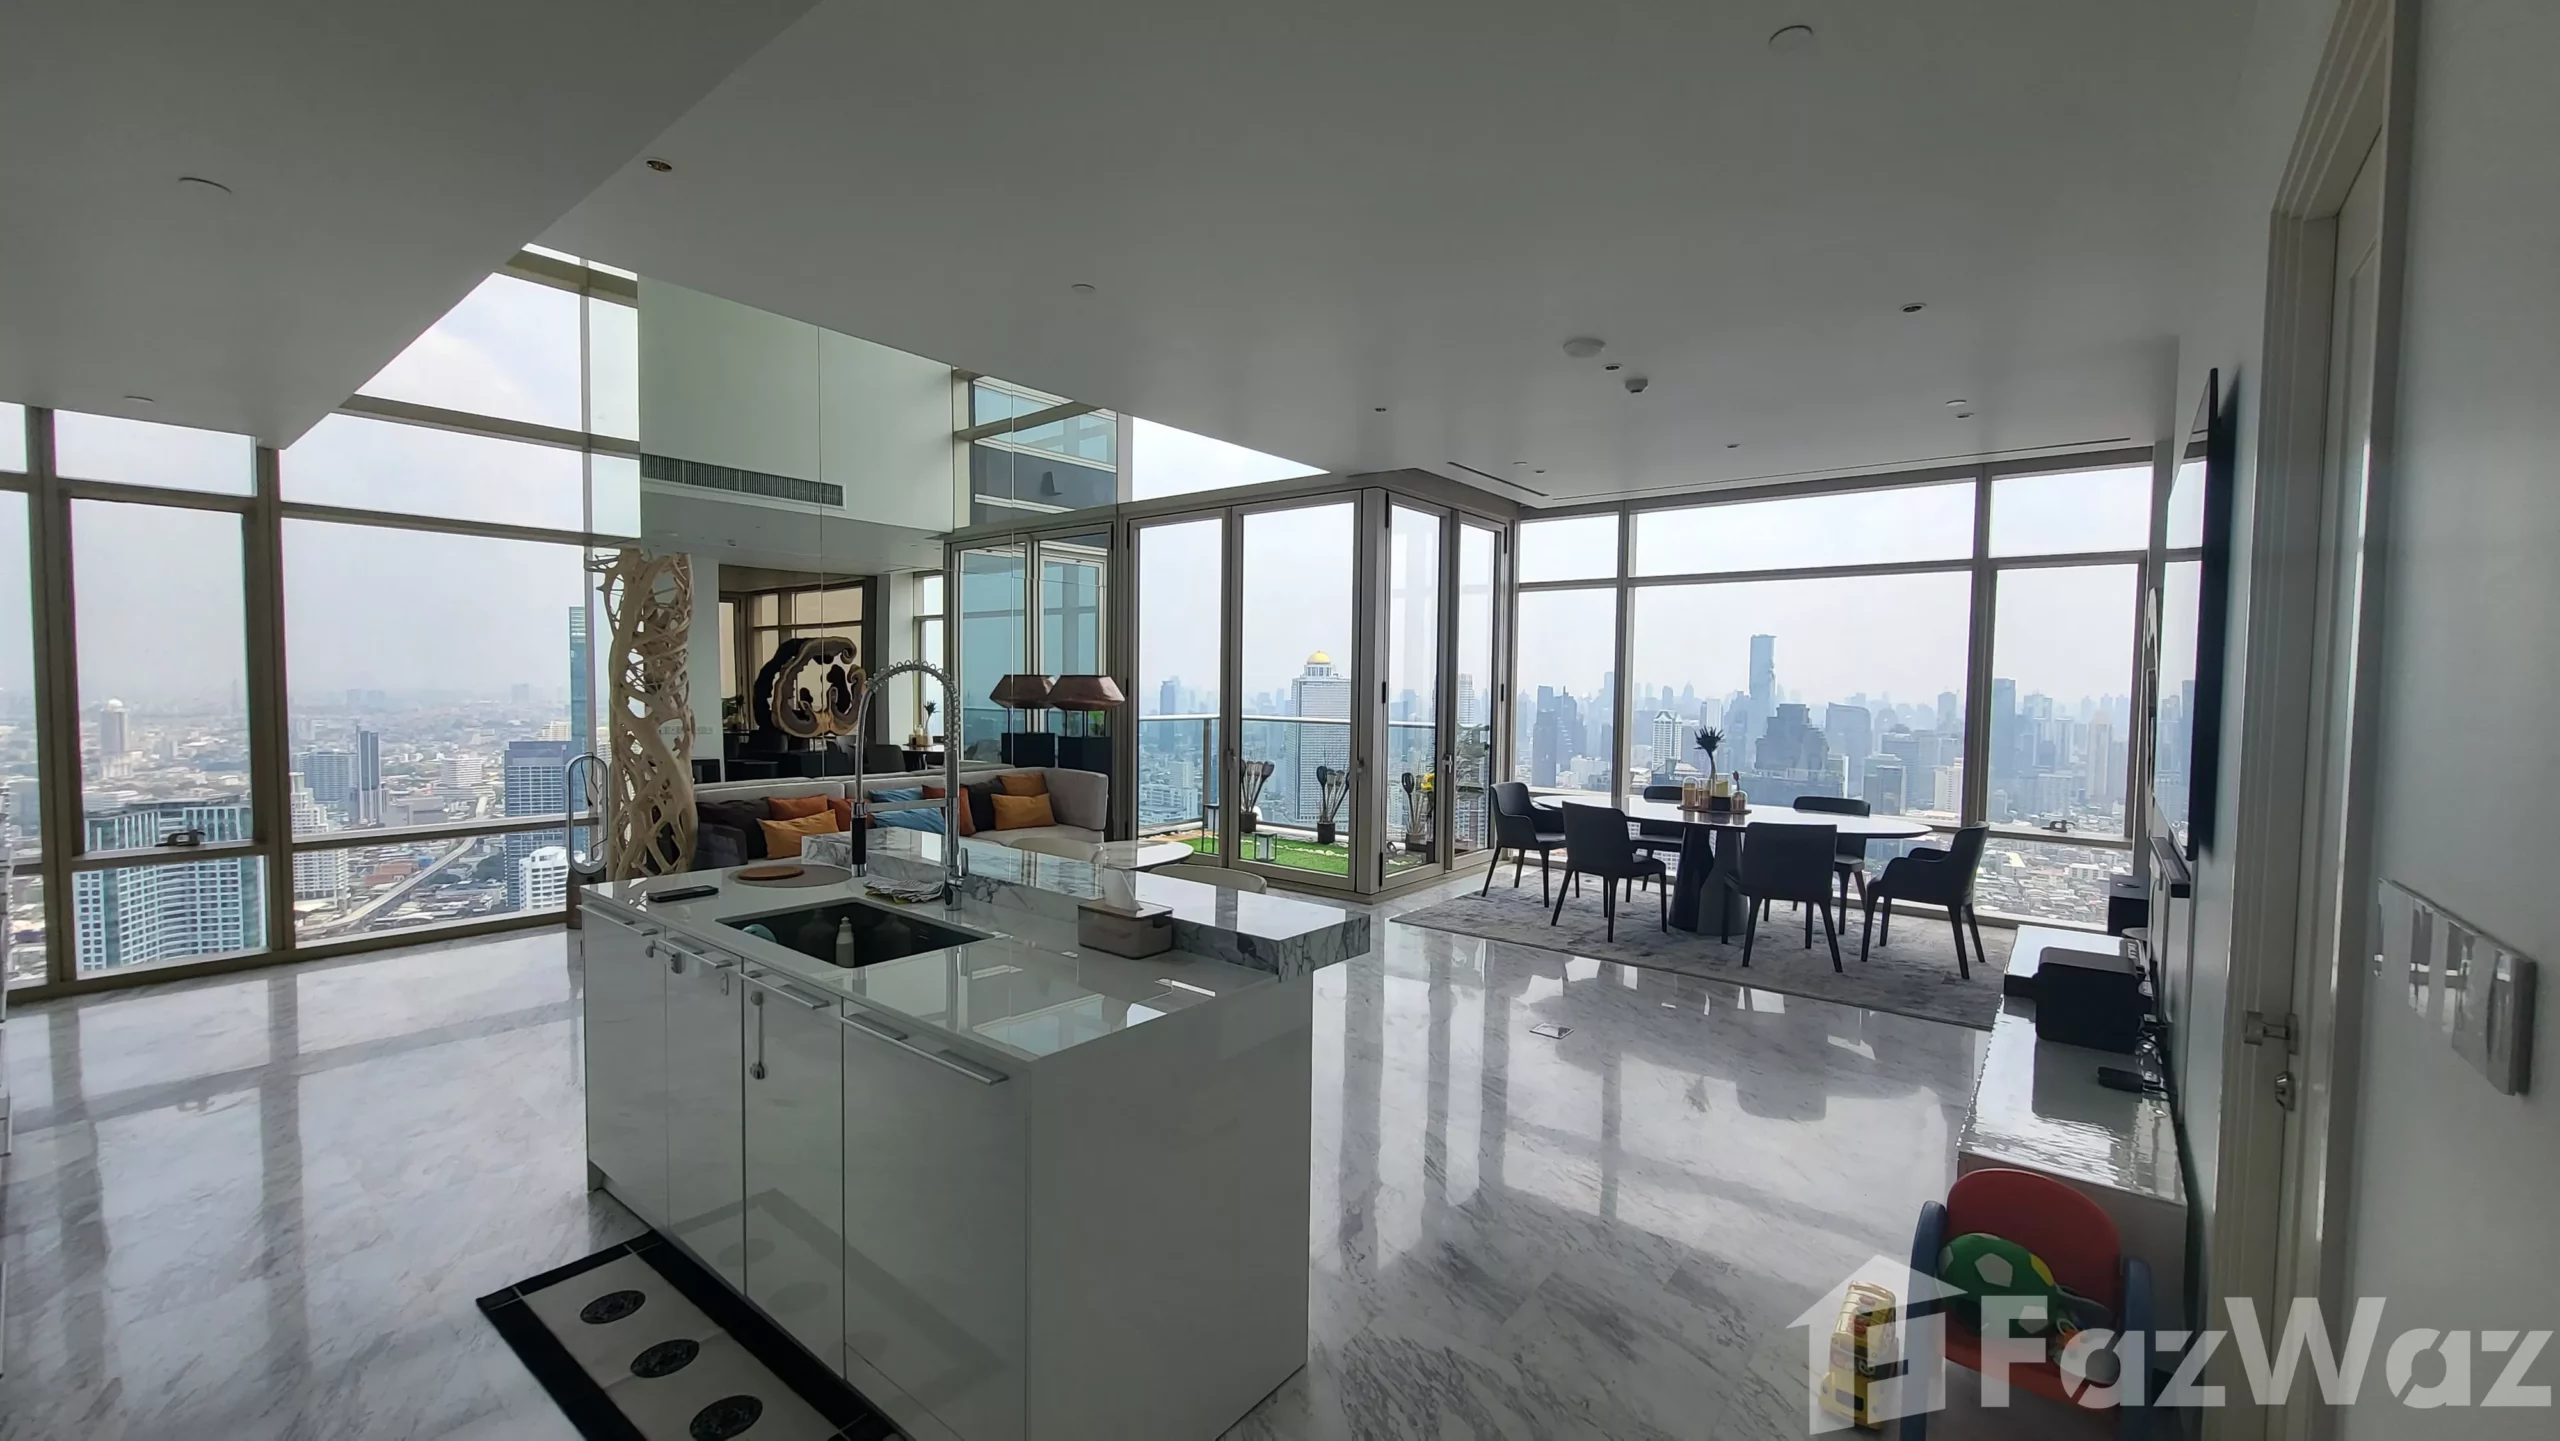 5 Sathorn condos offering a luxurious lifestyle